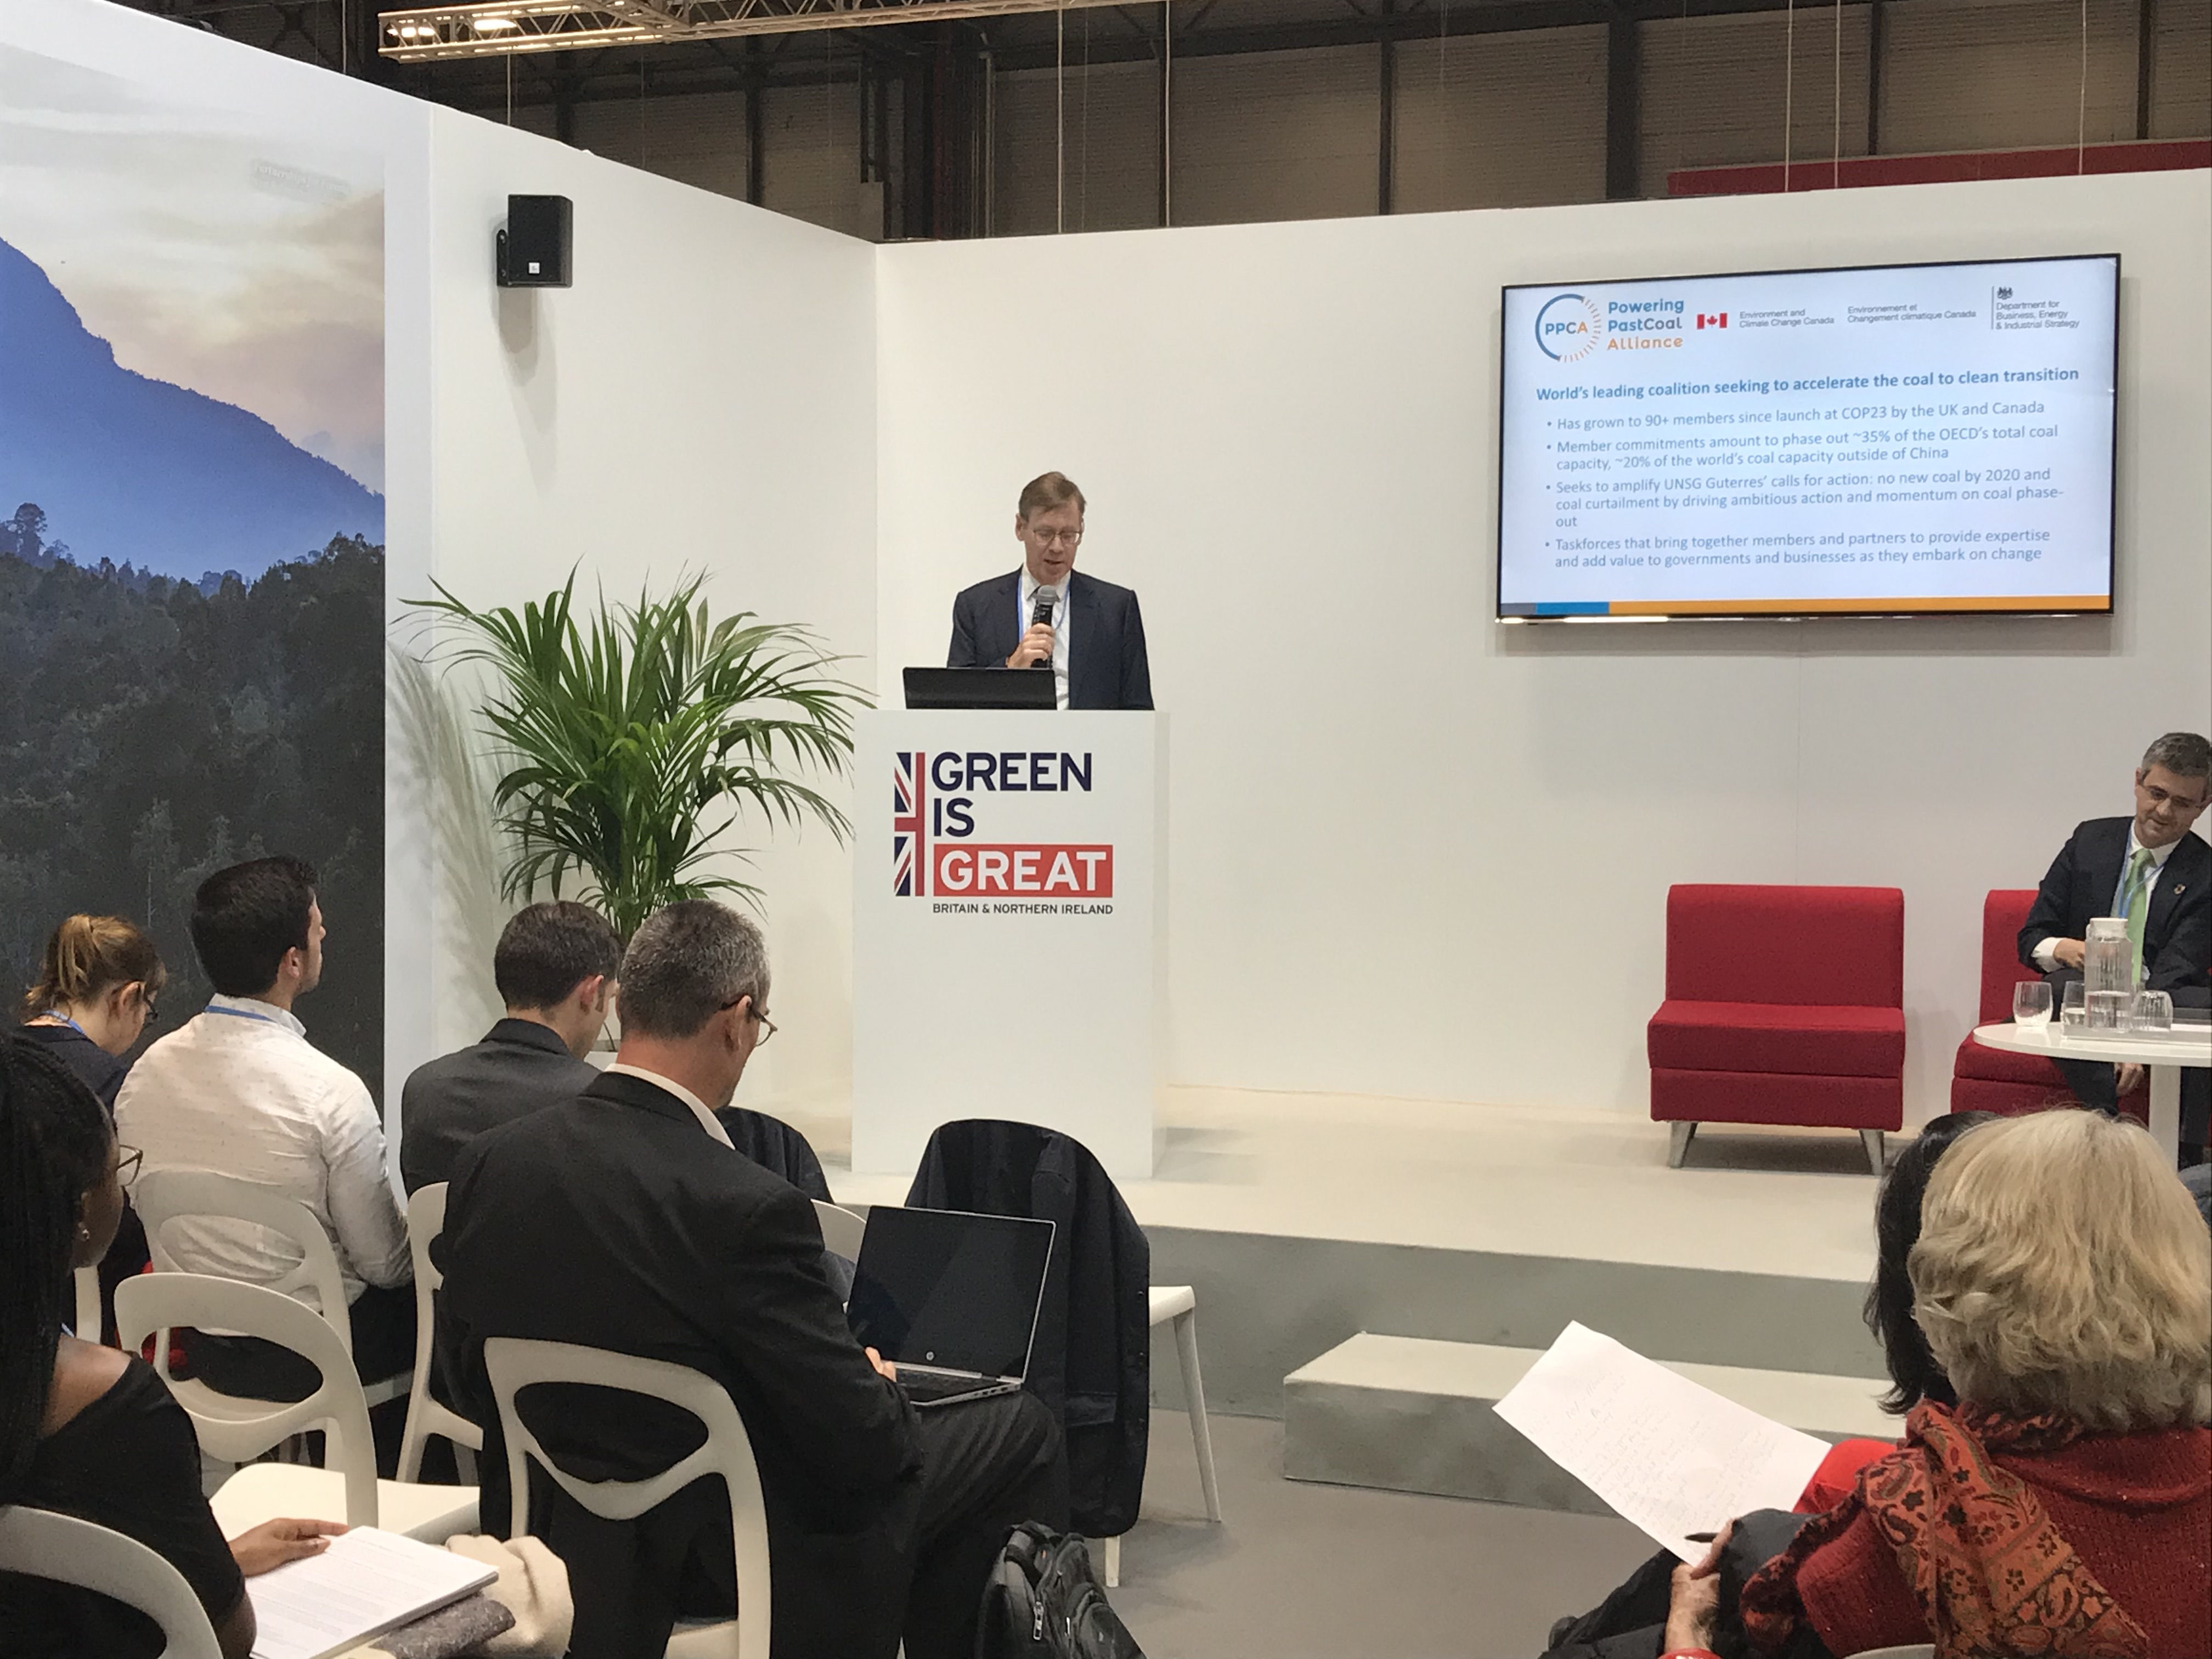 Will Gardiner at Powering Past Coal Alliance event in the UK Pavilion at COP25 in Madrid